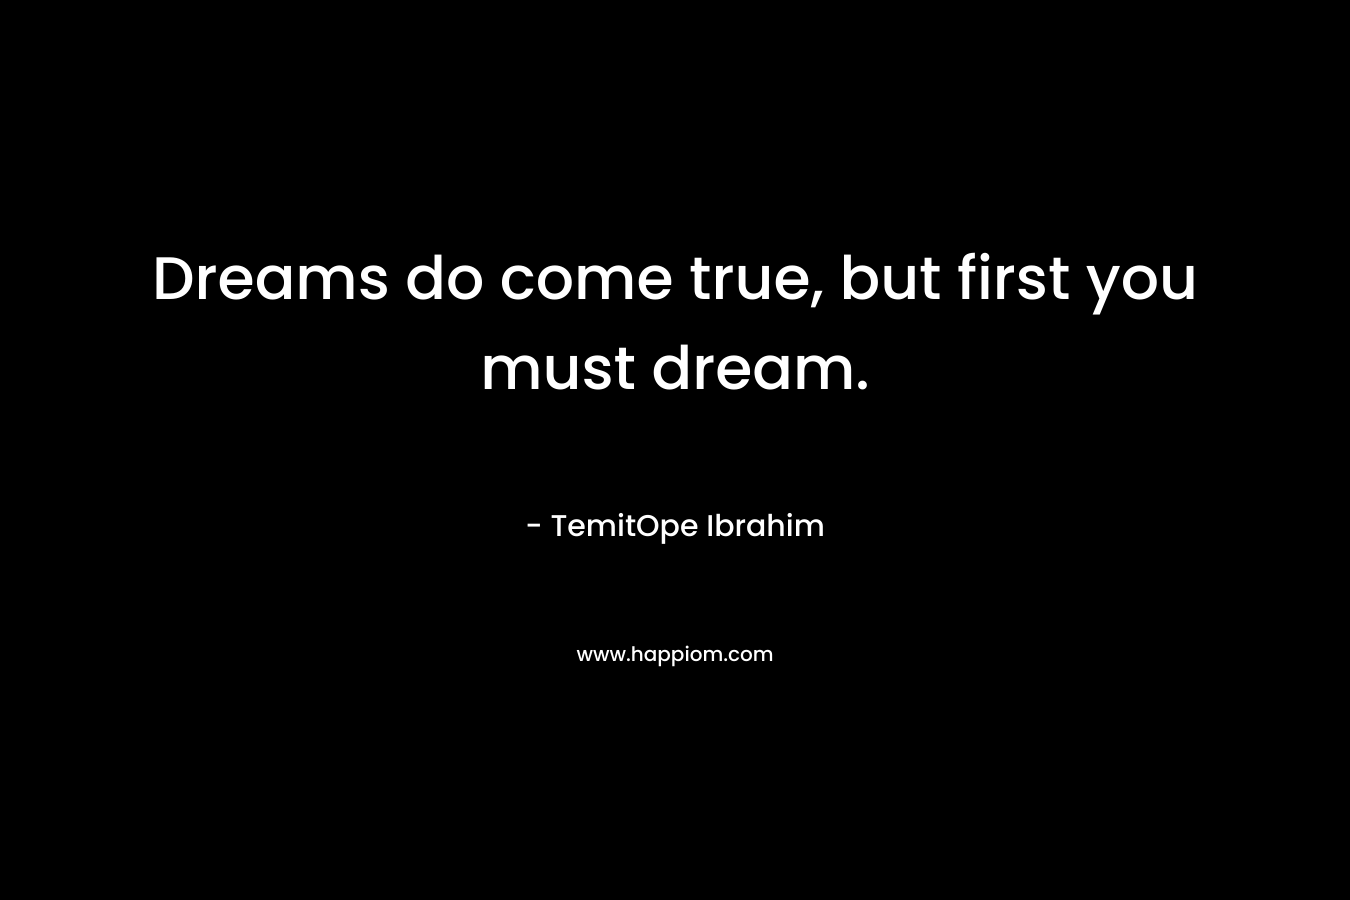 Dreams do come true, but first you must dream. – TemitOpe Ibrahim